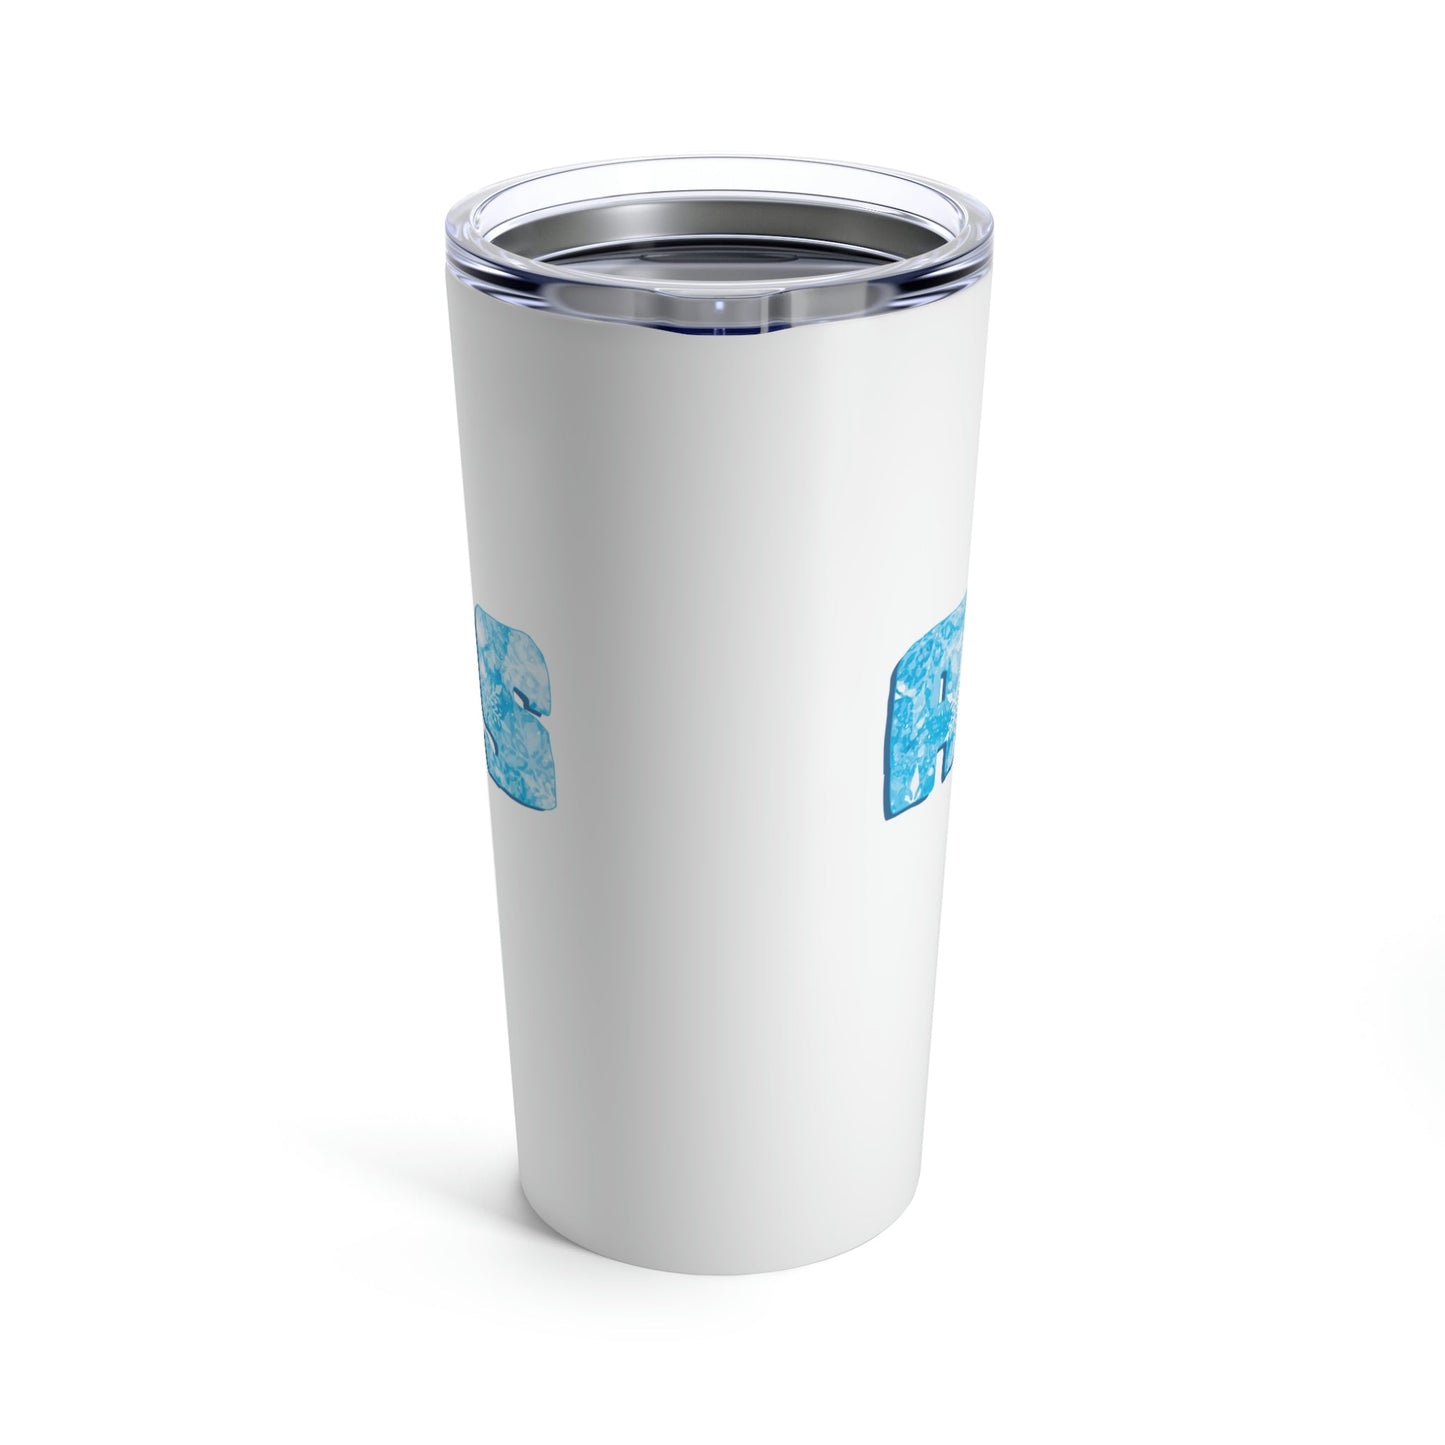 Always Cold Winter Snowflake Motivation Slogan Stainless Steel Hot or Cold Vacuum Tumbler 20oz Ichaku [Perfect Gifts Selection]